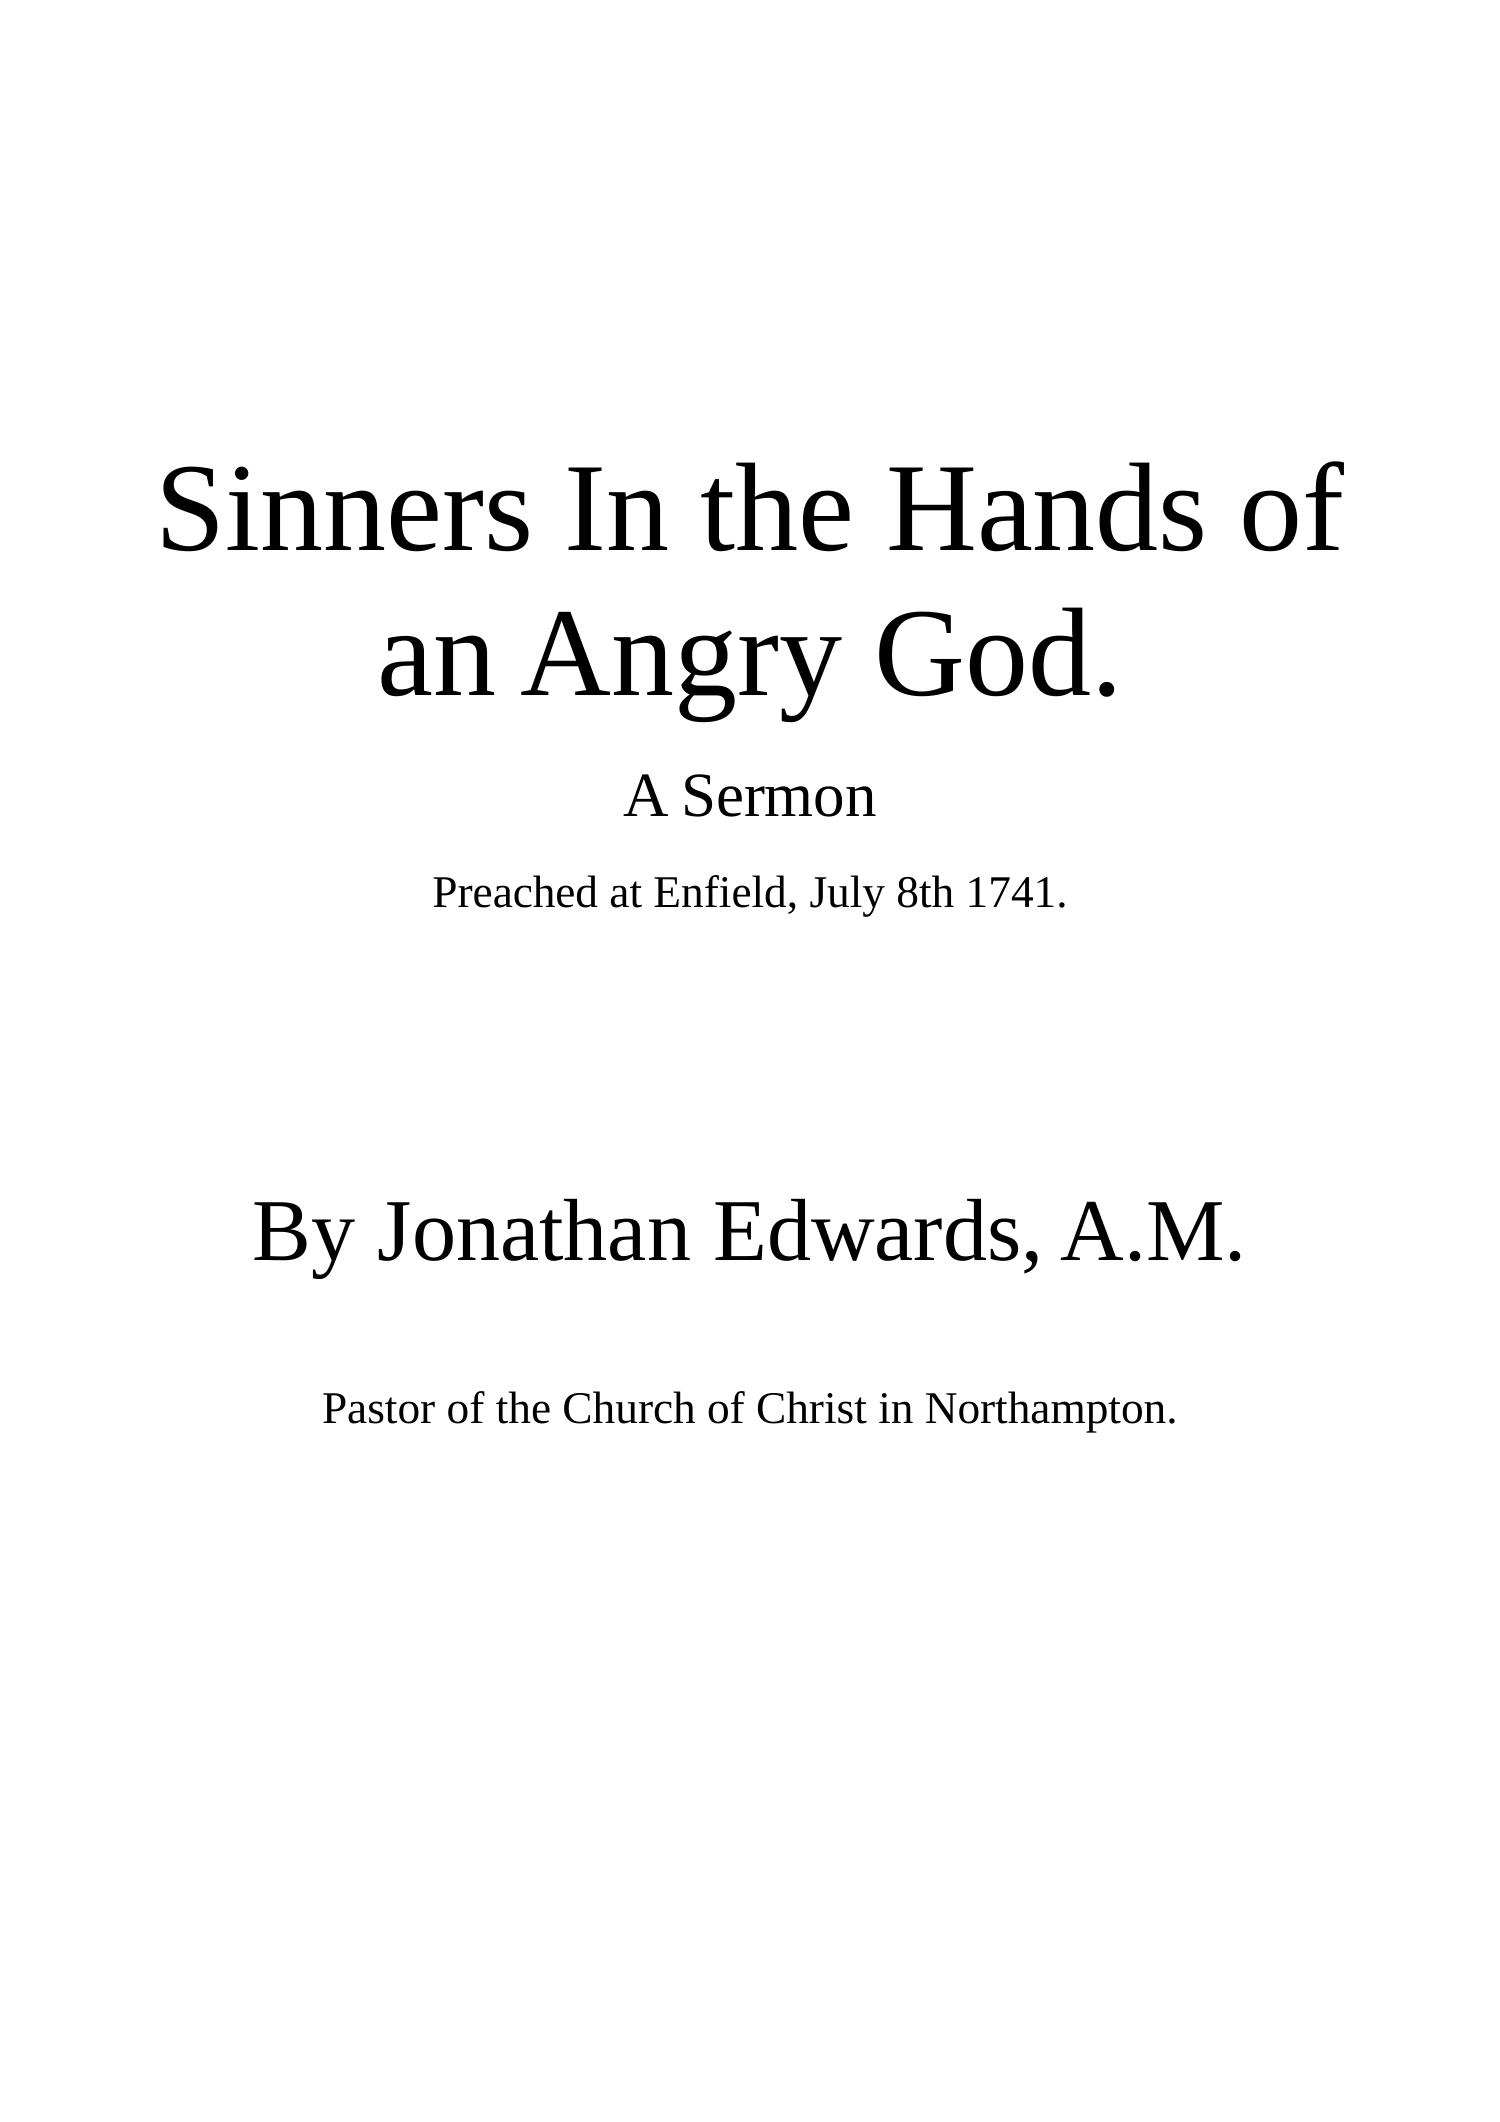 Sinners In The Hands of an Angry God.pdf | DocDroid